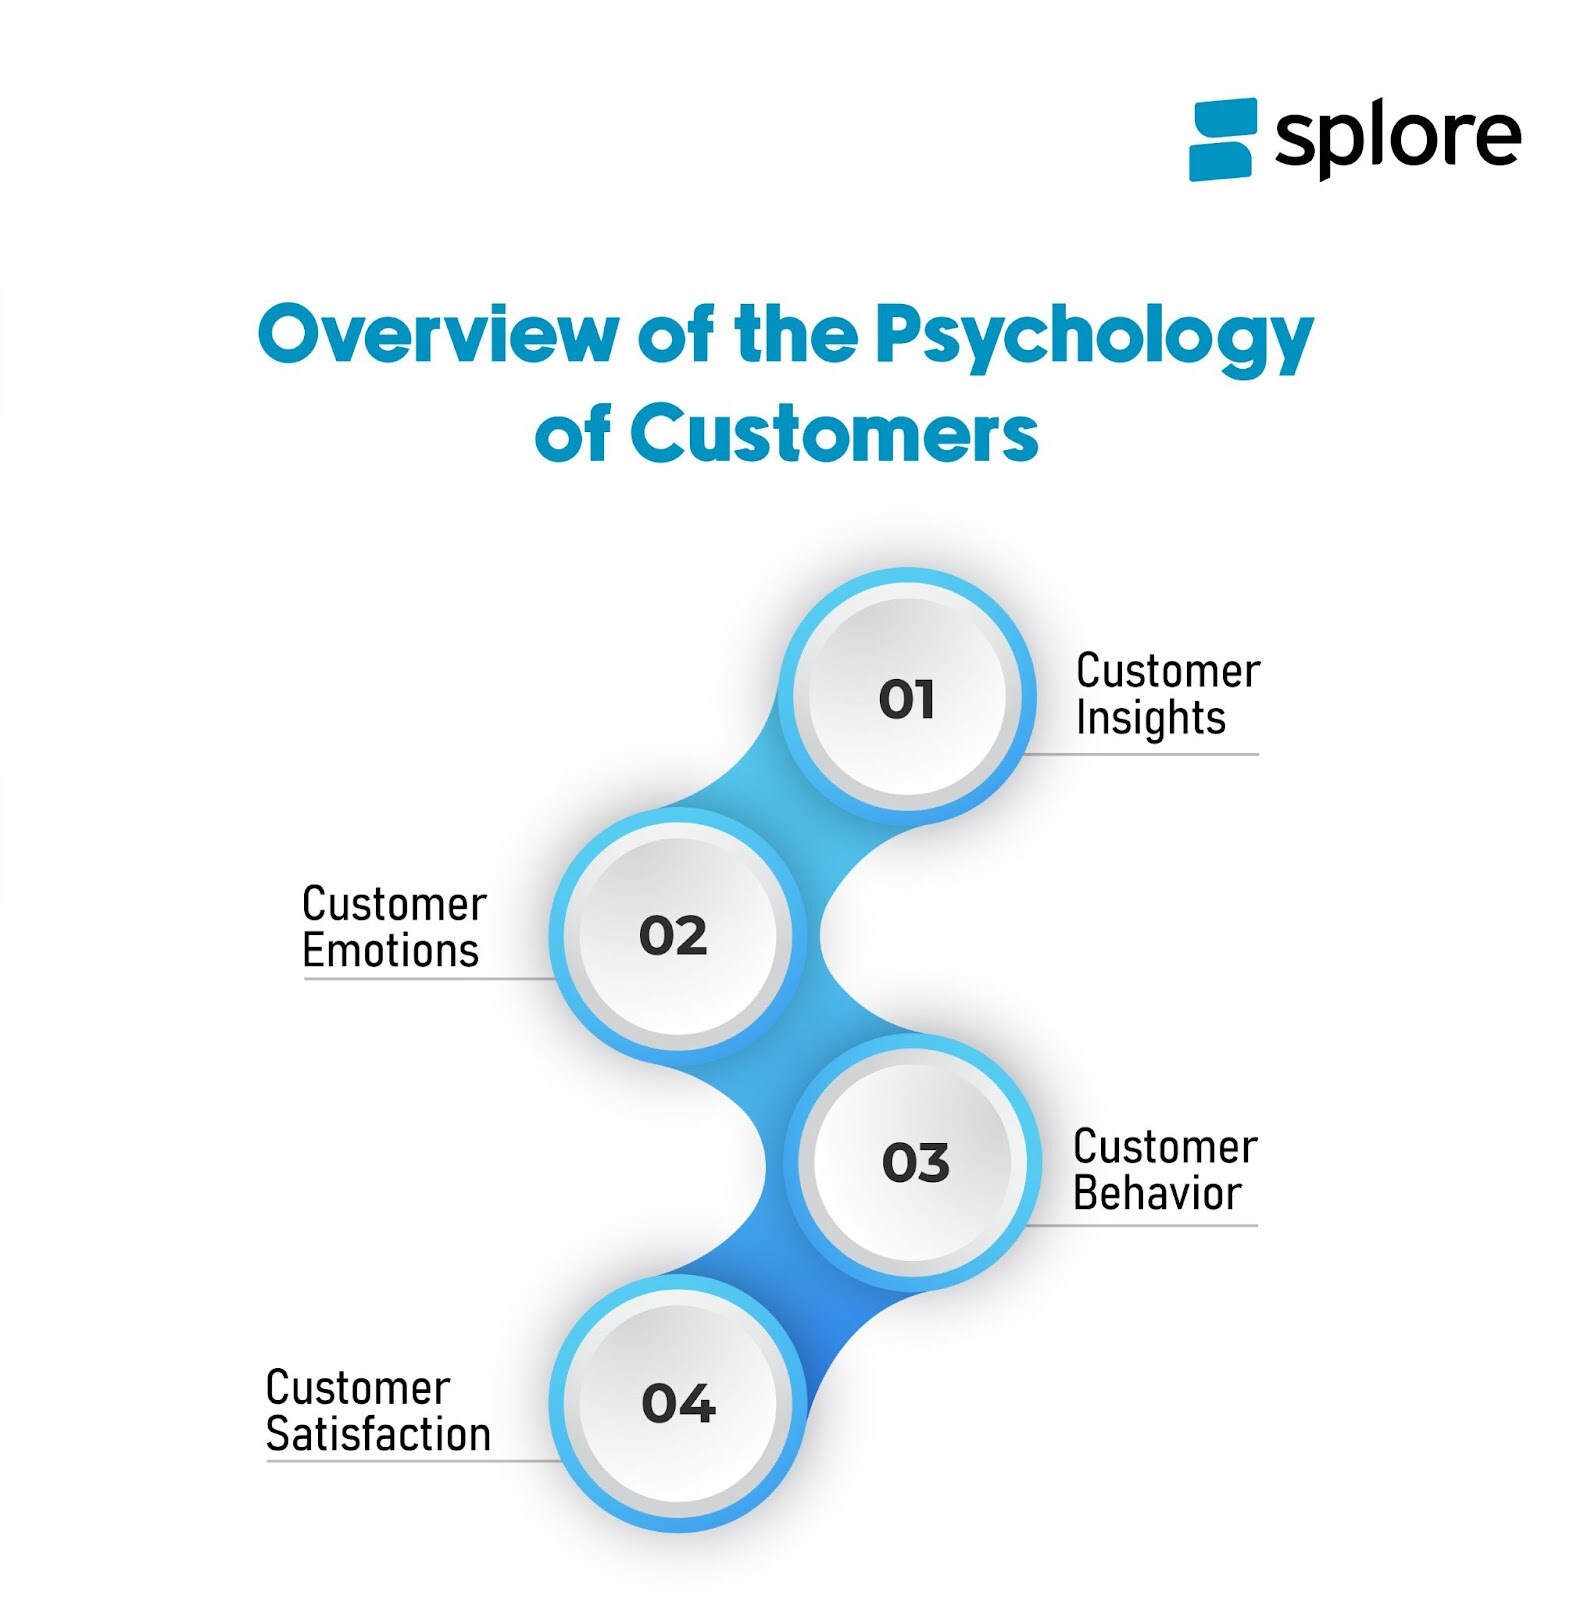 Overview of the Psychology of Customers